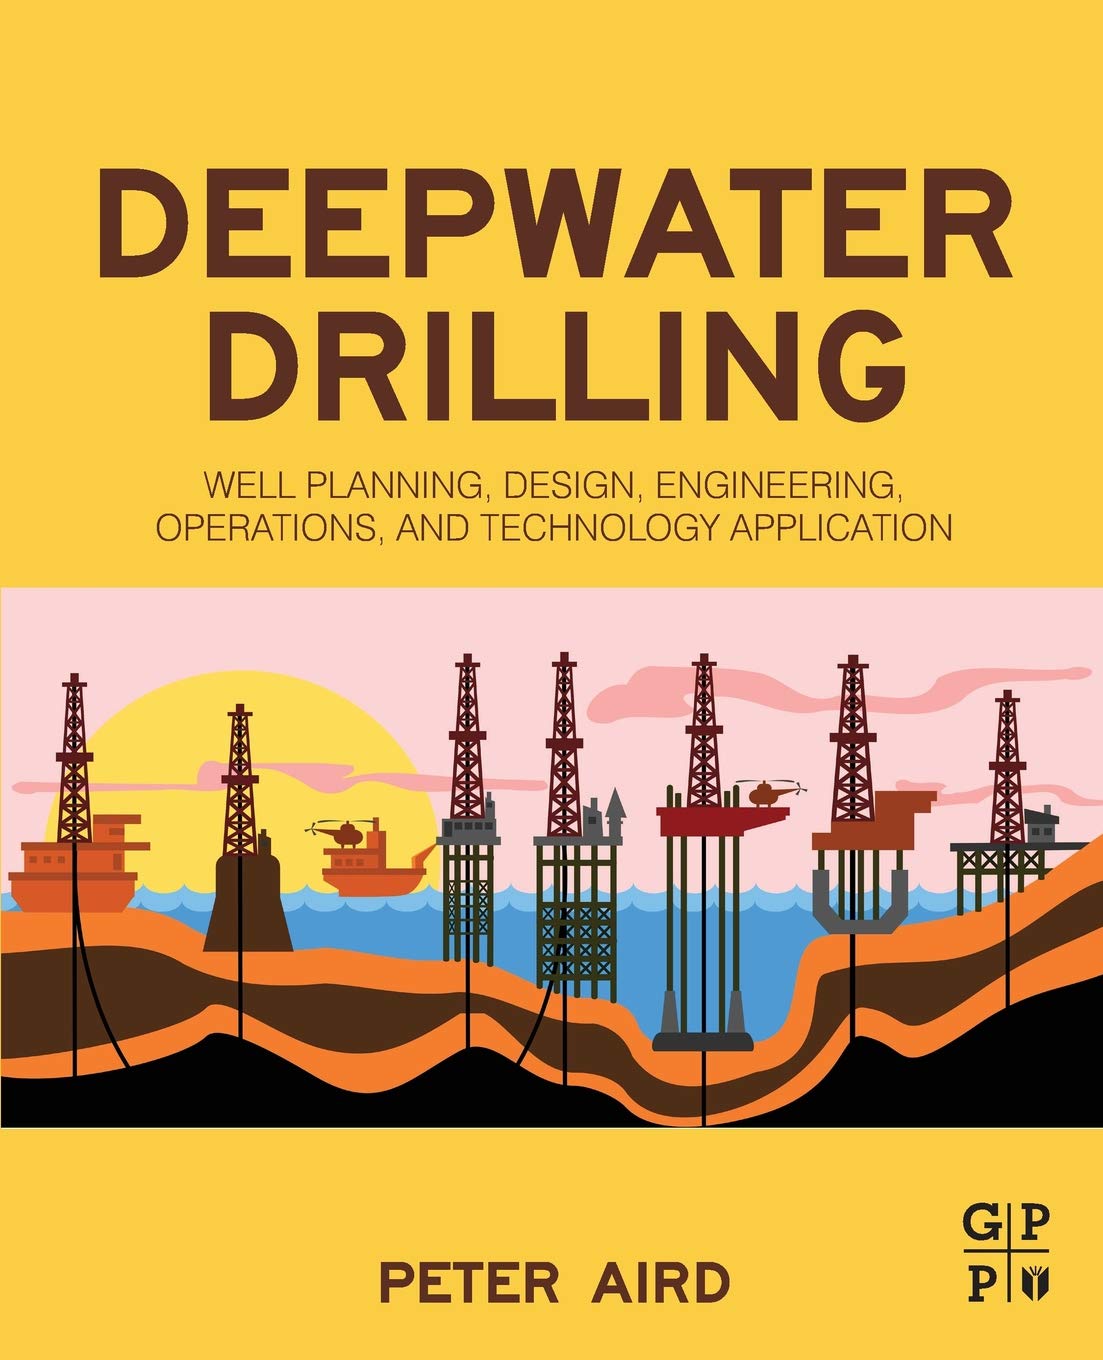 Deepwater Drilling: Well Planning, Design, Engineering, Operations, and Technology Application